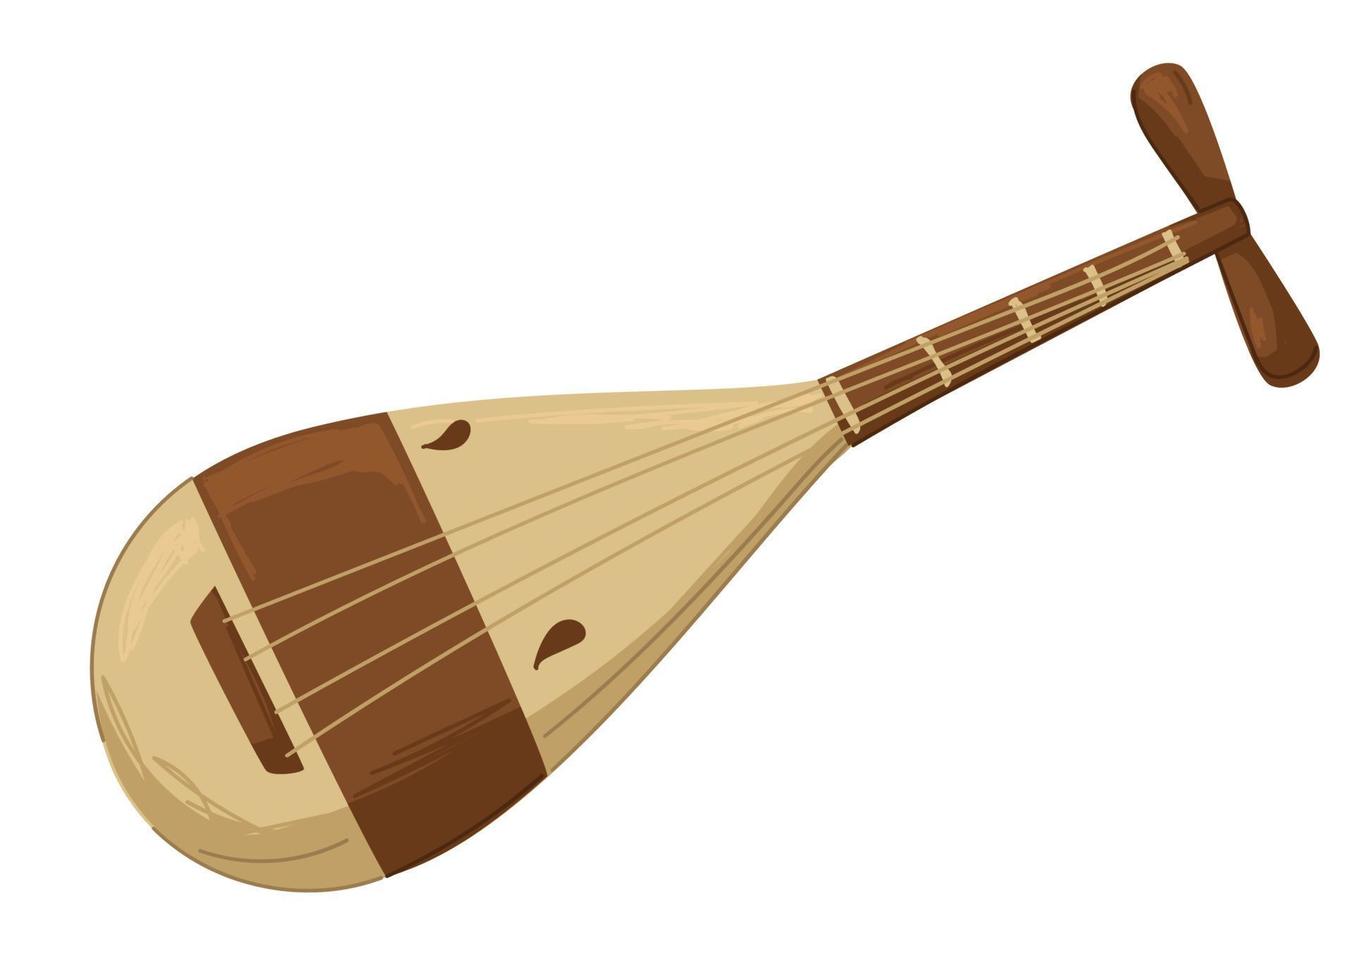 Liuqin string music instrument of China, culture vector